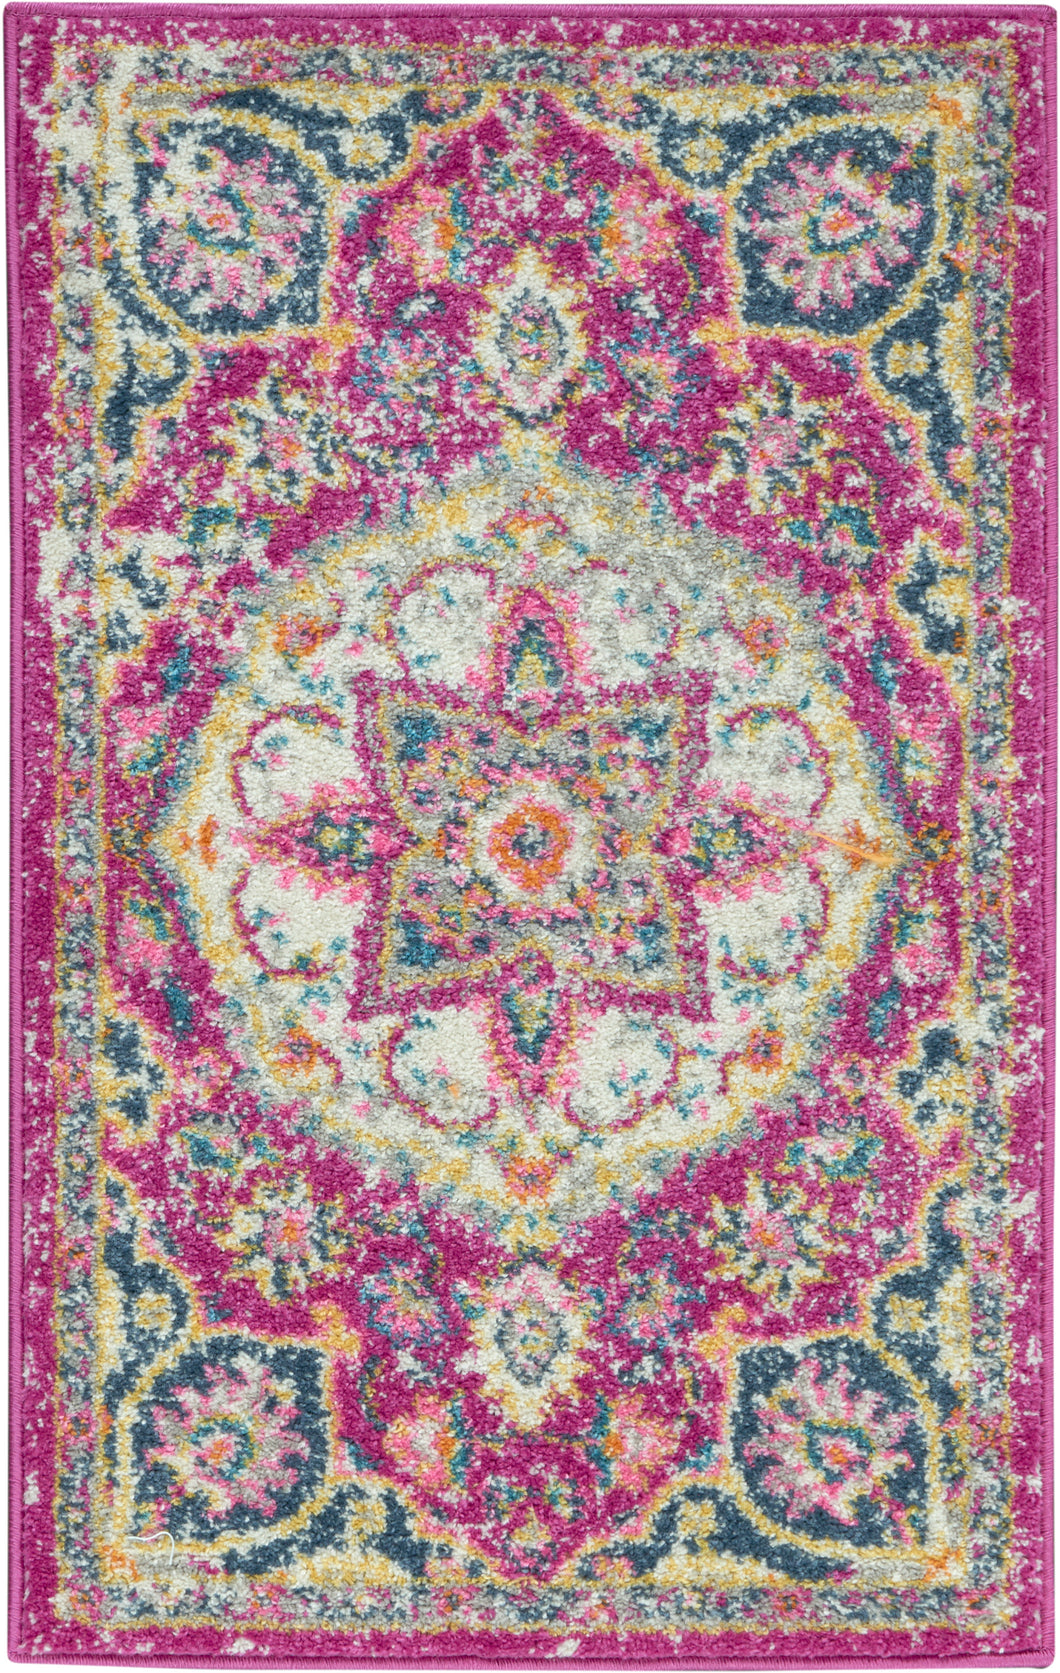 Nourison Passion Bohemian Pink Colored 2'x3' Area Rug PSN22 Pink